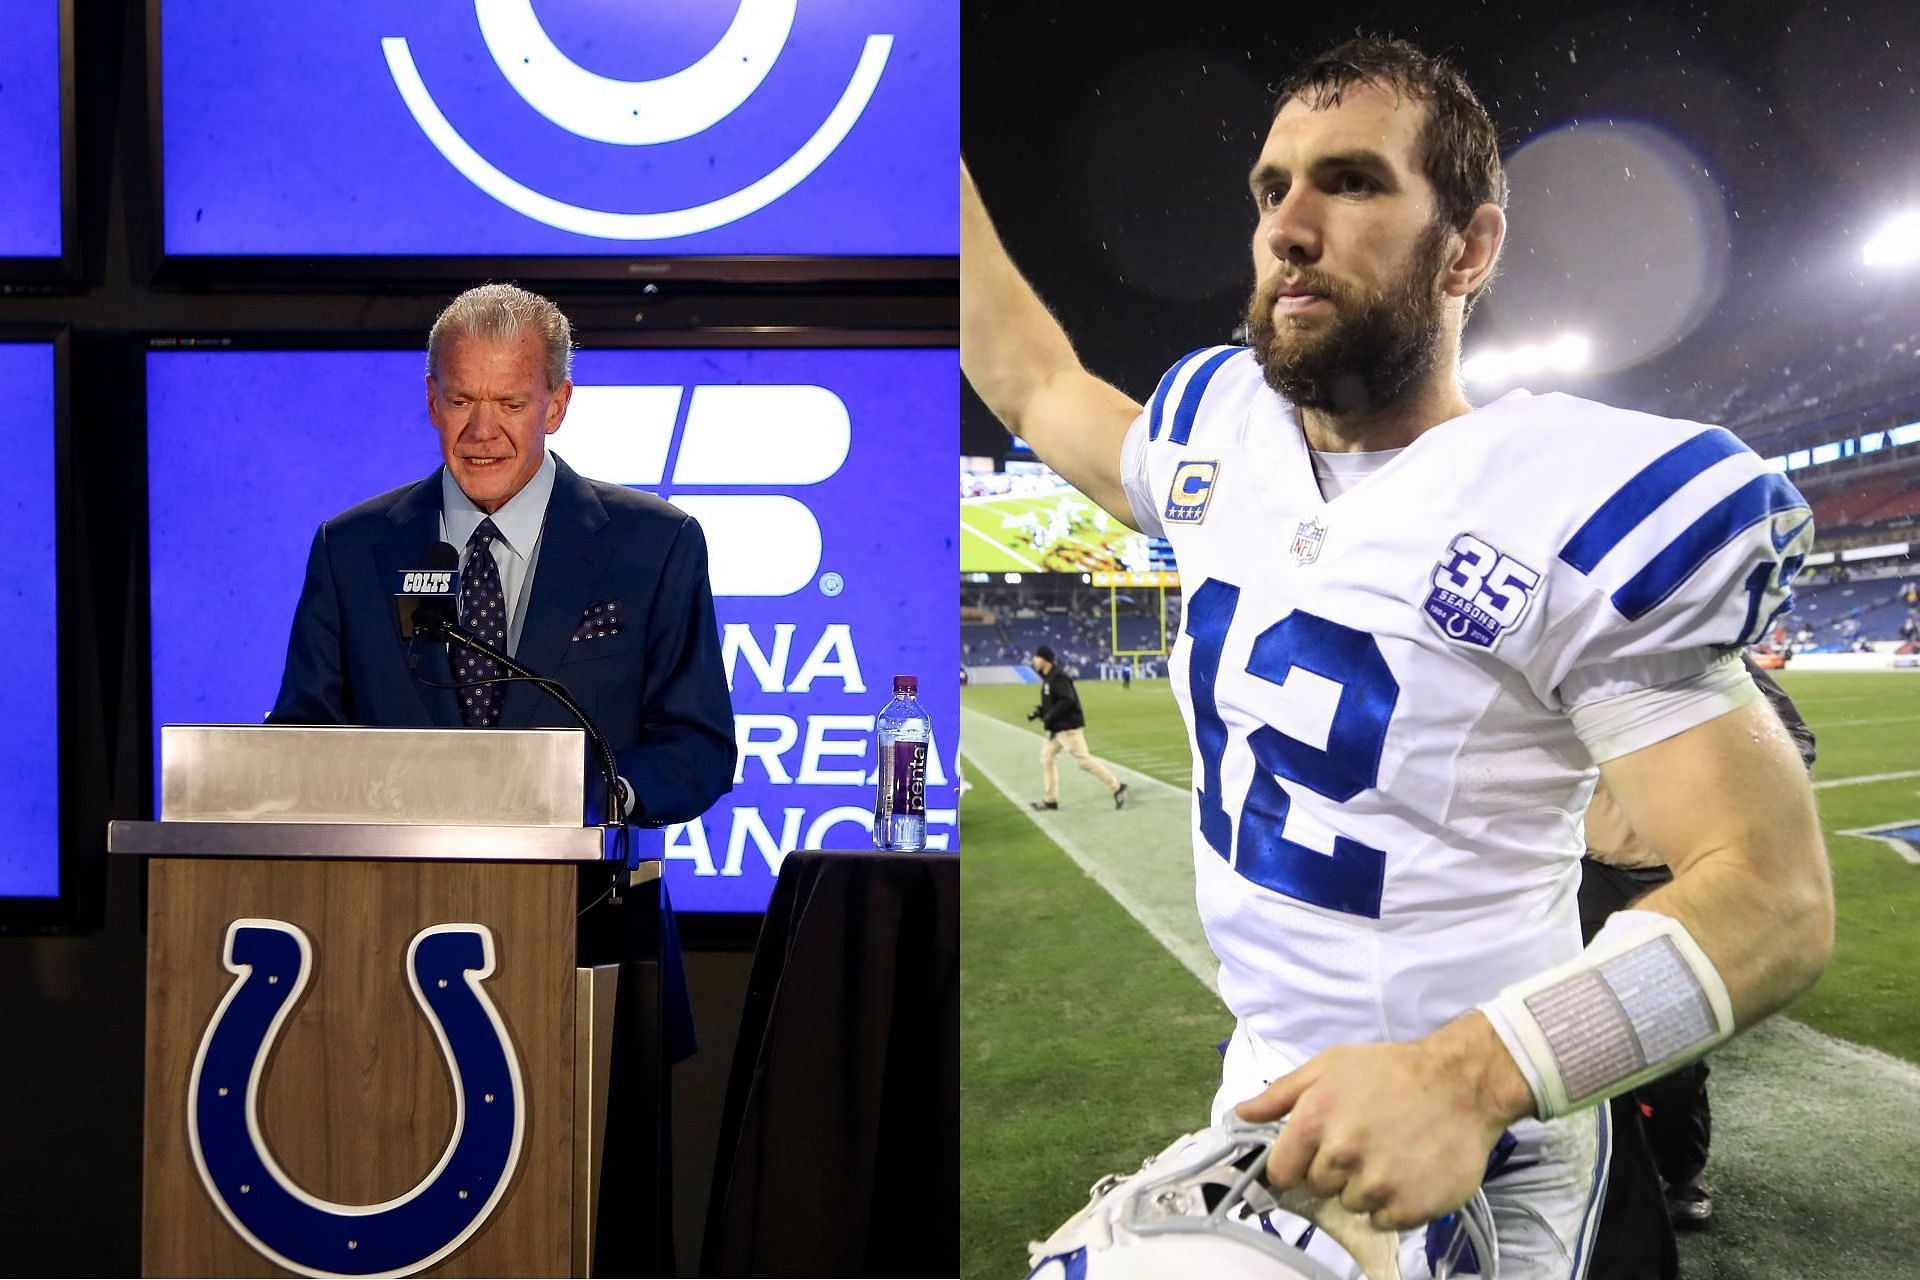 Jim Irsay (L) and Andrew (R)